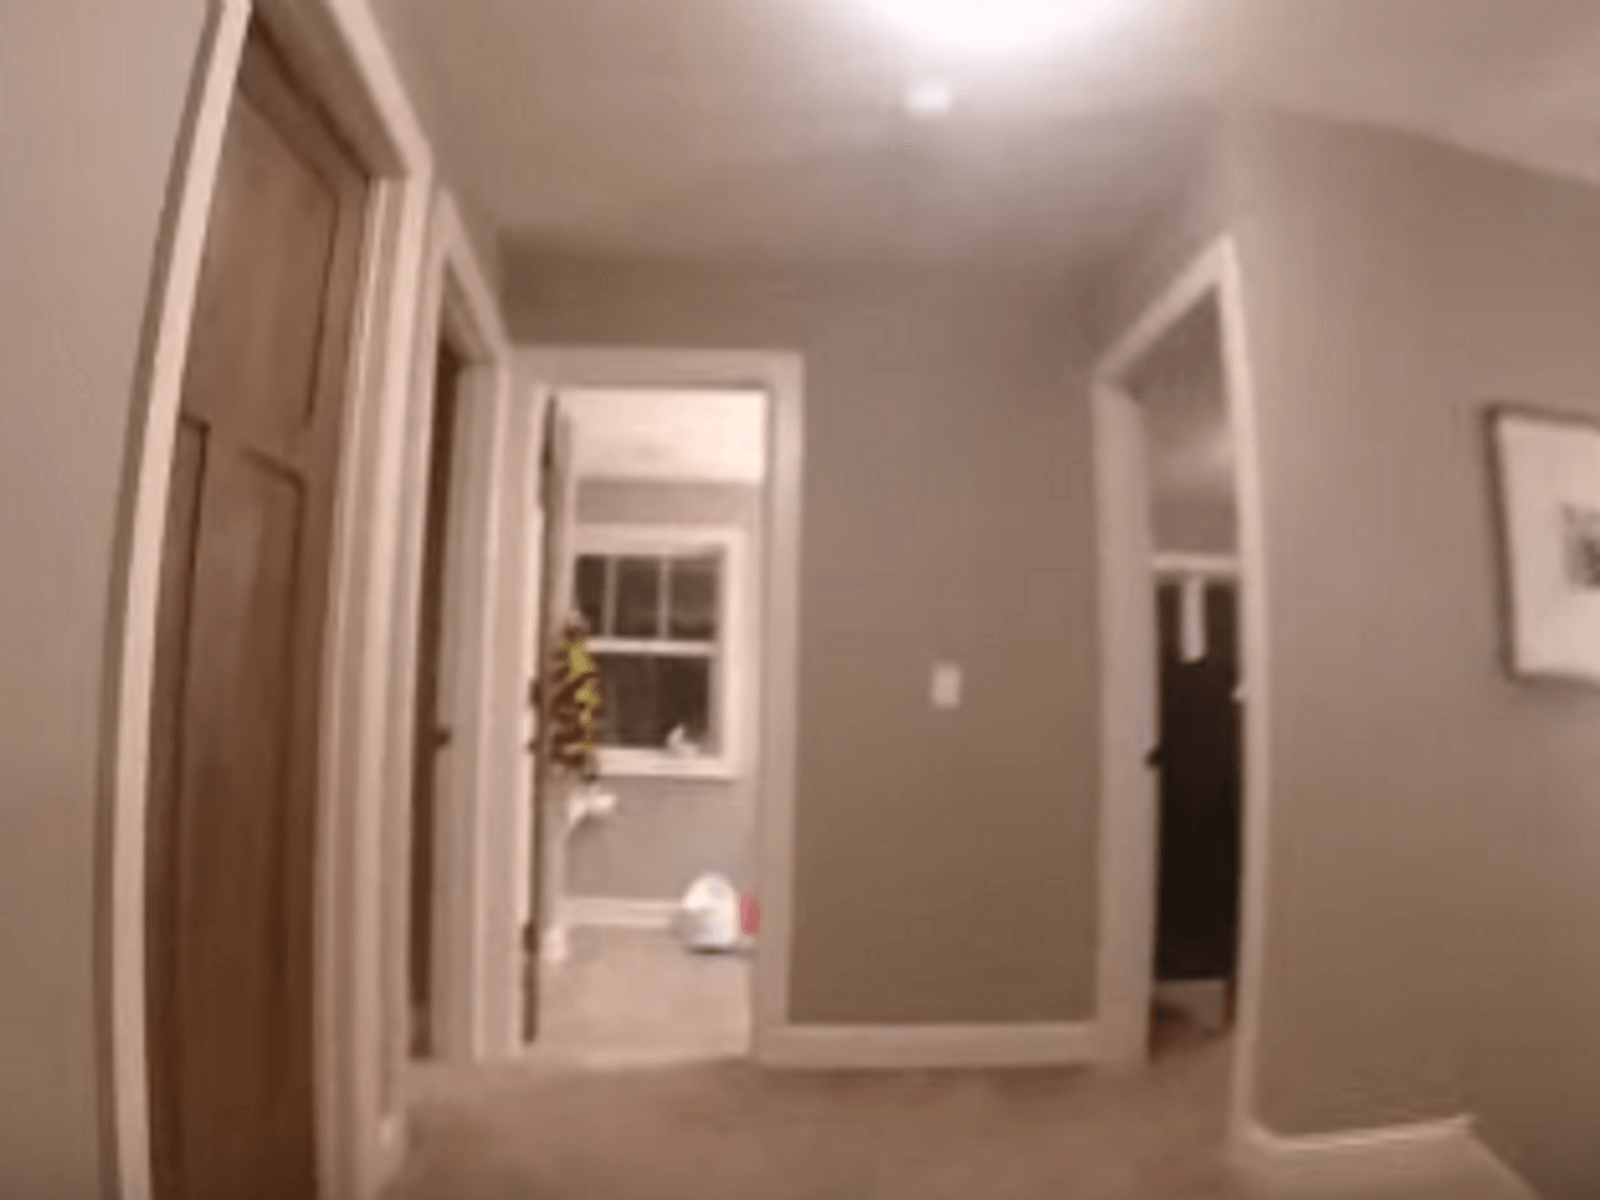 how to hide a gopro in a room